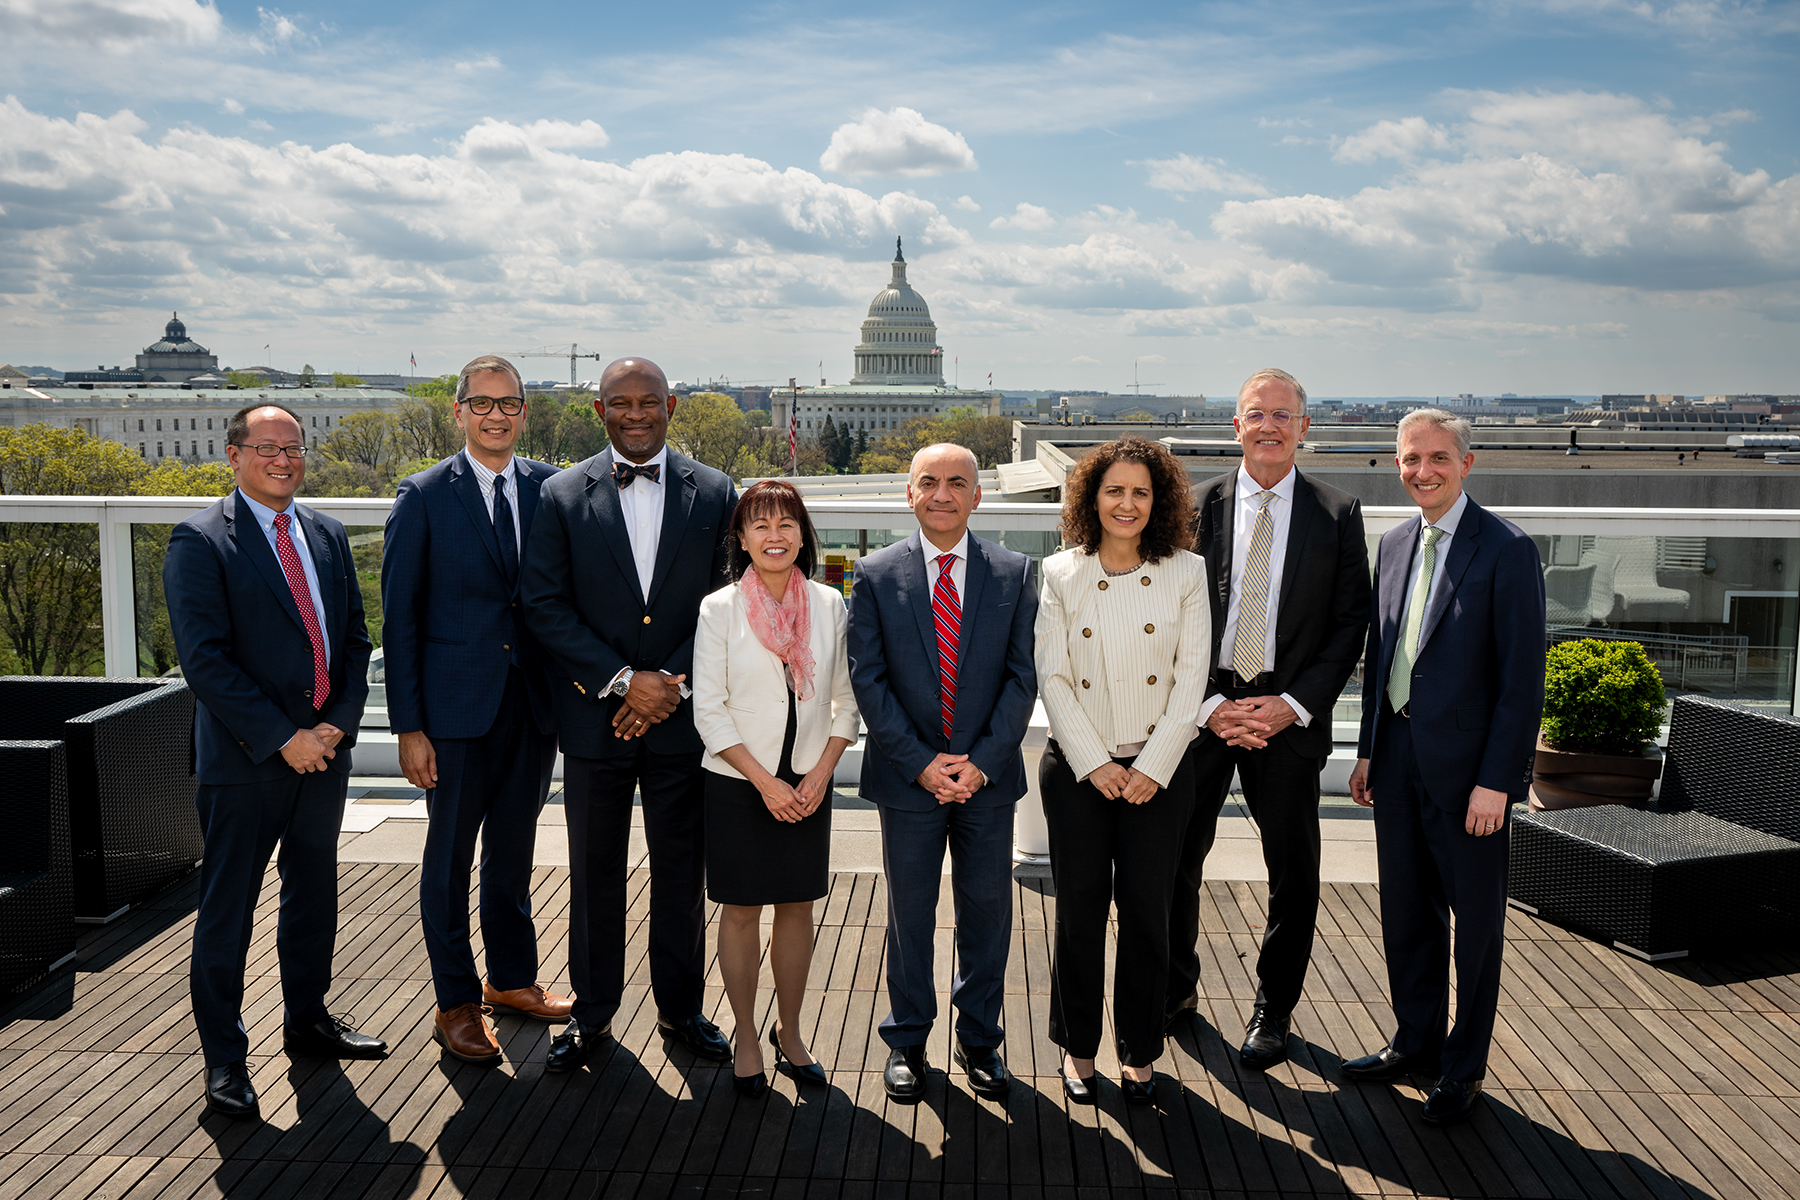 Physician leaders advocate for medical innovation on Capitol Hill